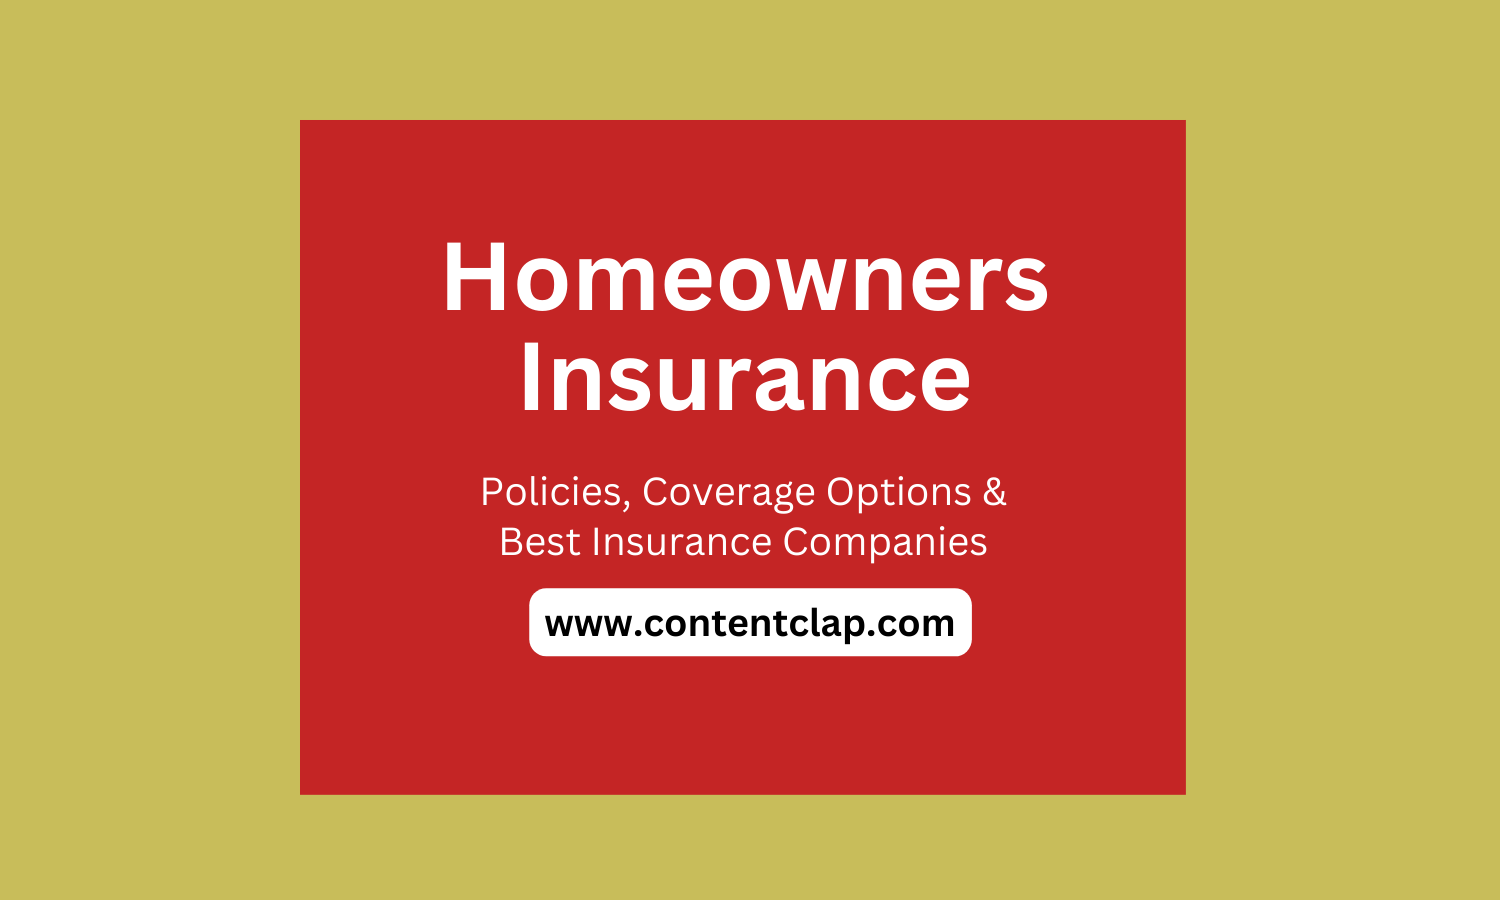 You are currently viewing Homeowners Insurance: Overview, Policies, Coverage Options, and best insurance companies